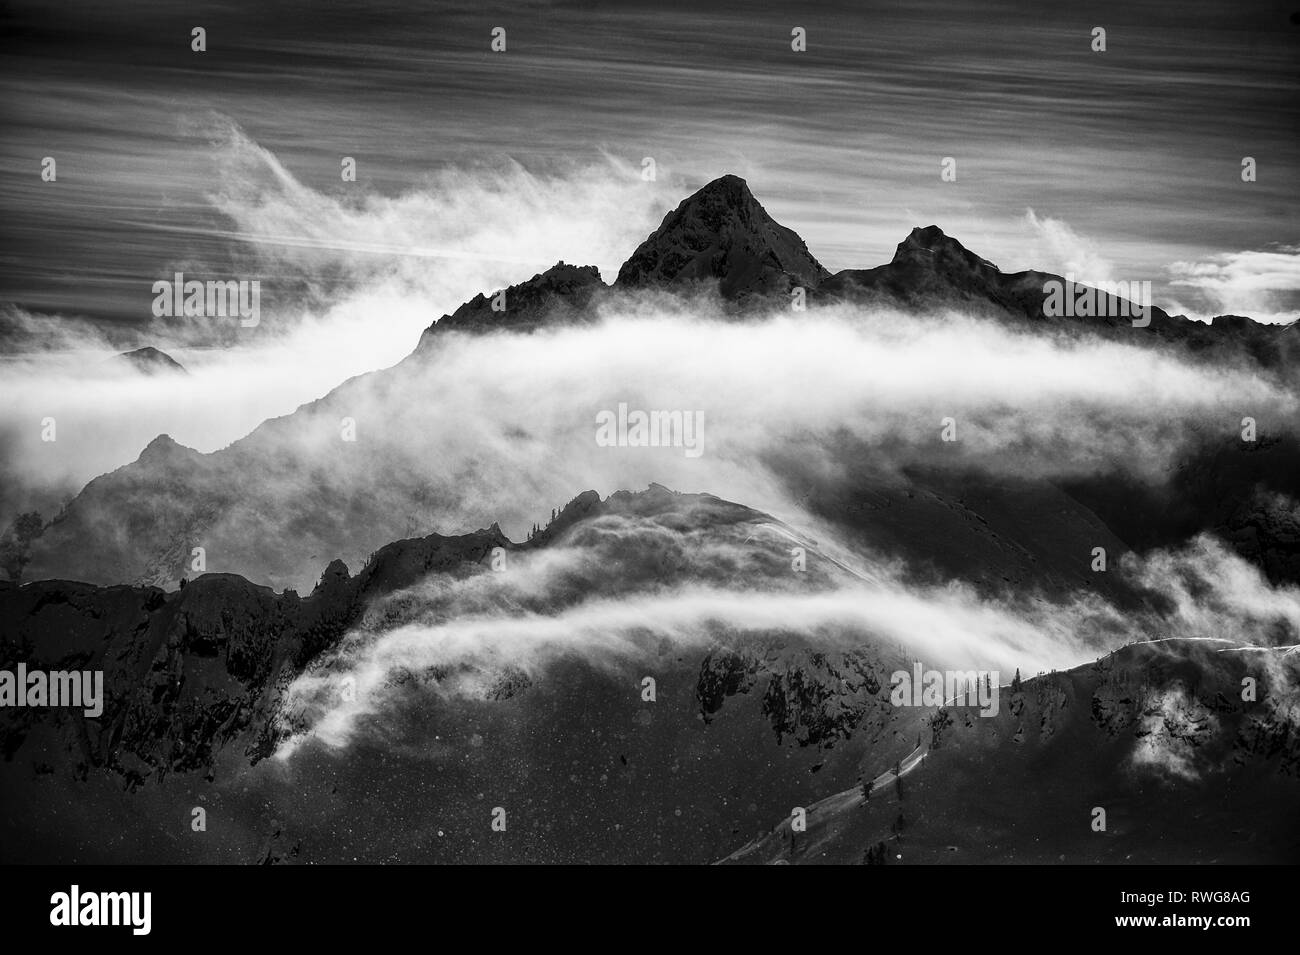 Mount Harlow with cloud veil in Black and white in the Valhalla Mountain range, BC, Canada, Winter Stock Photo